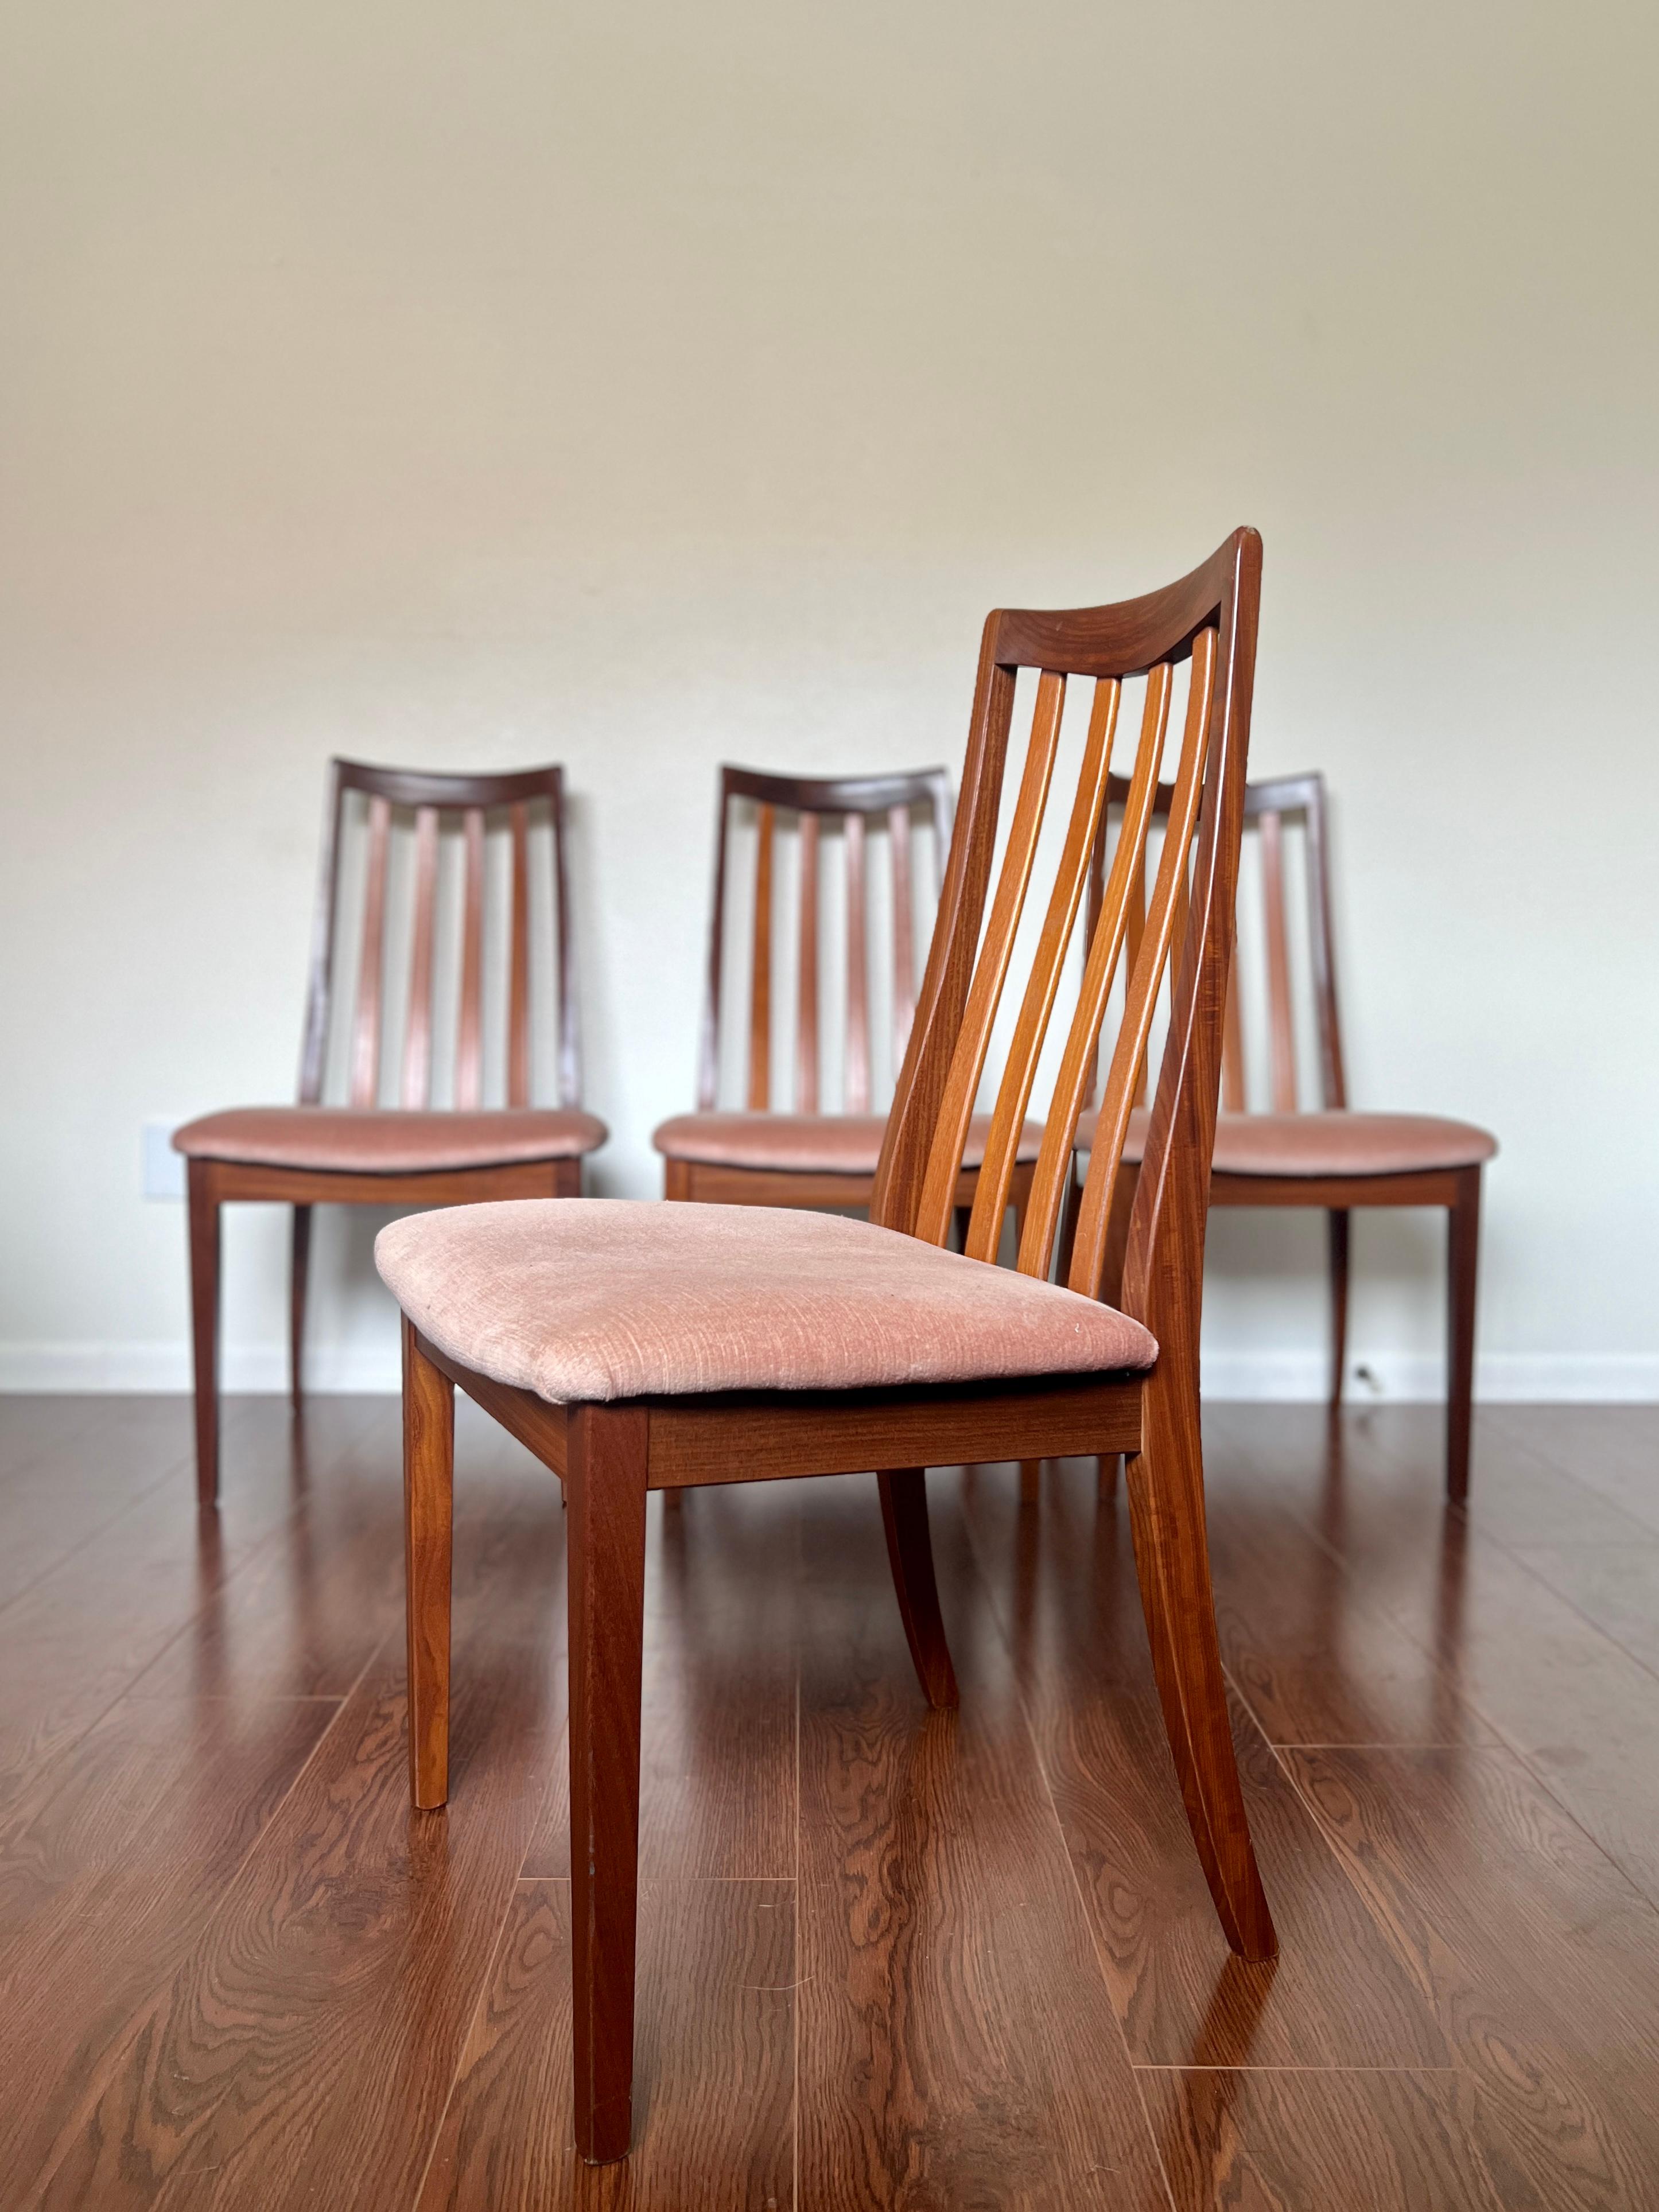 Lovely Set of 4 Vintage Mid-Century Modern Dining Chairs by G-Plan 1